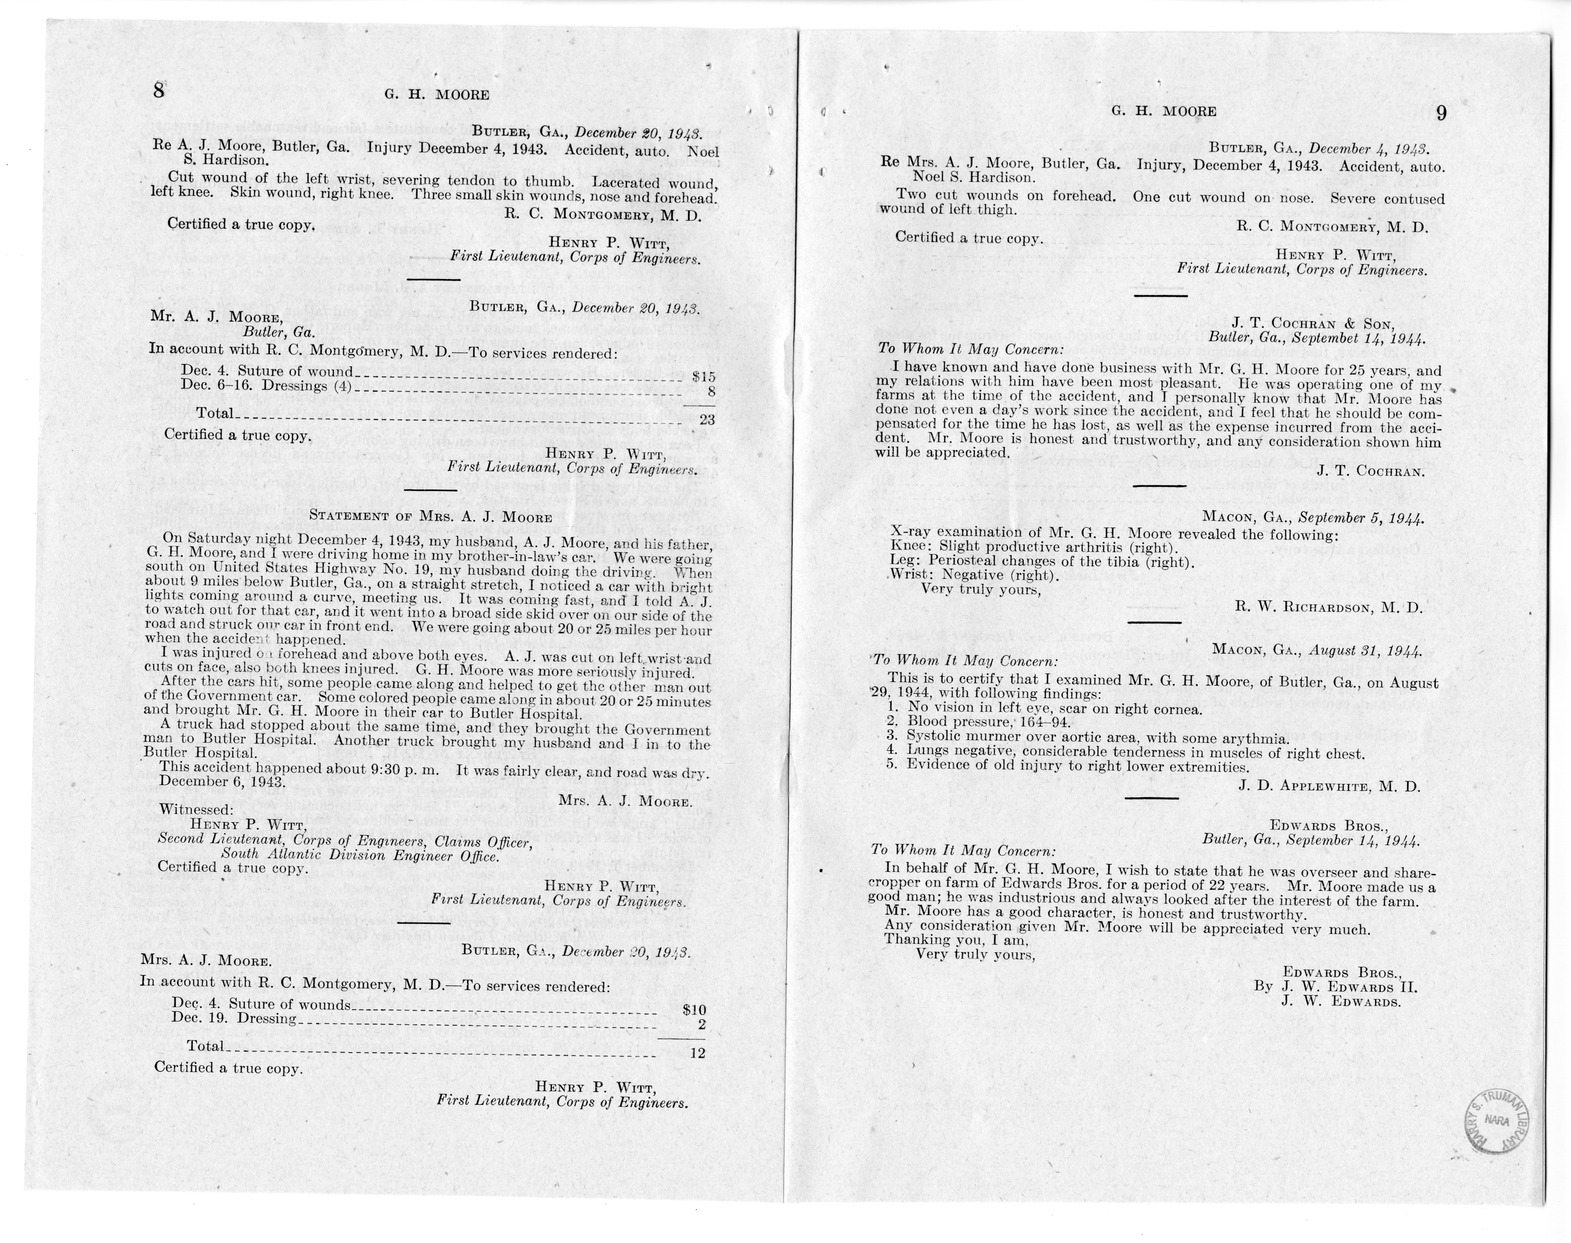 Memorandum from Frederick J. Bailey to M. C. Latta, H.R. 1015, For the Relief of G. H. Moore and Mr. and Mrs. A. J. Moore, with Attachments